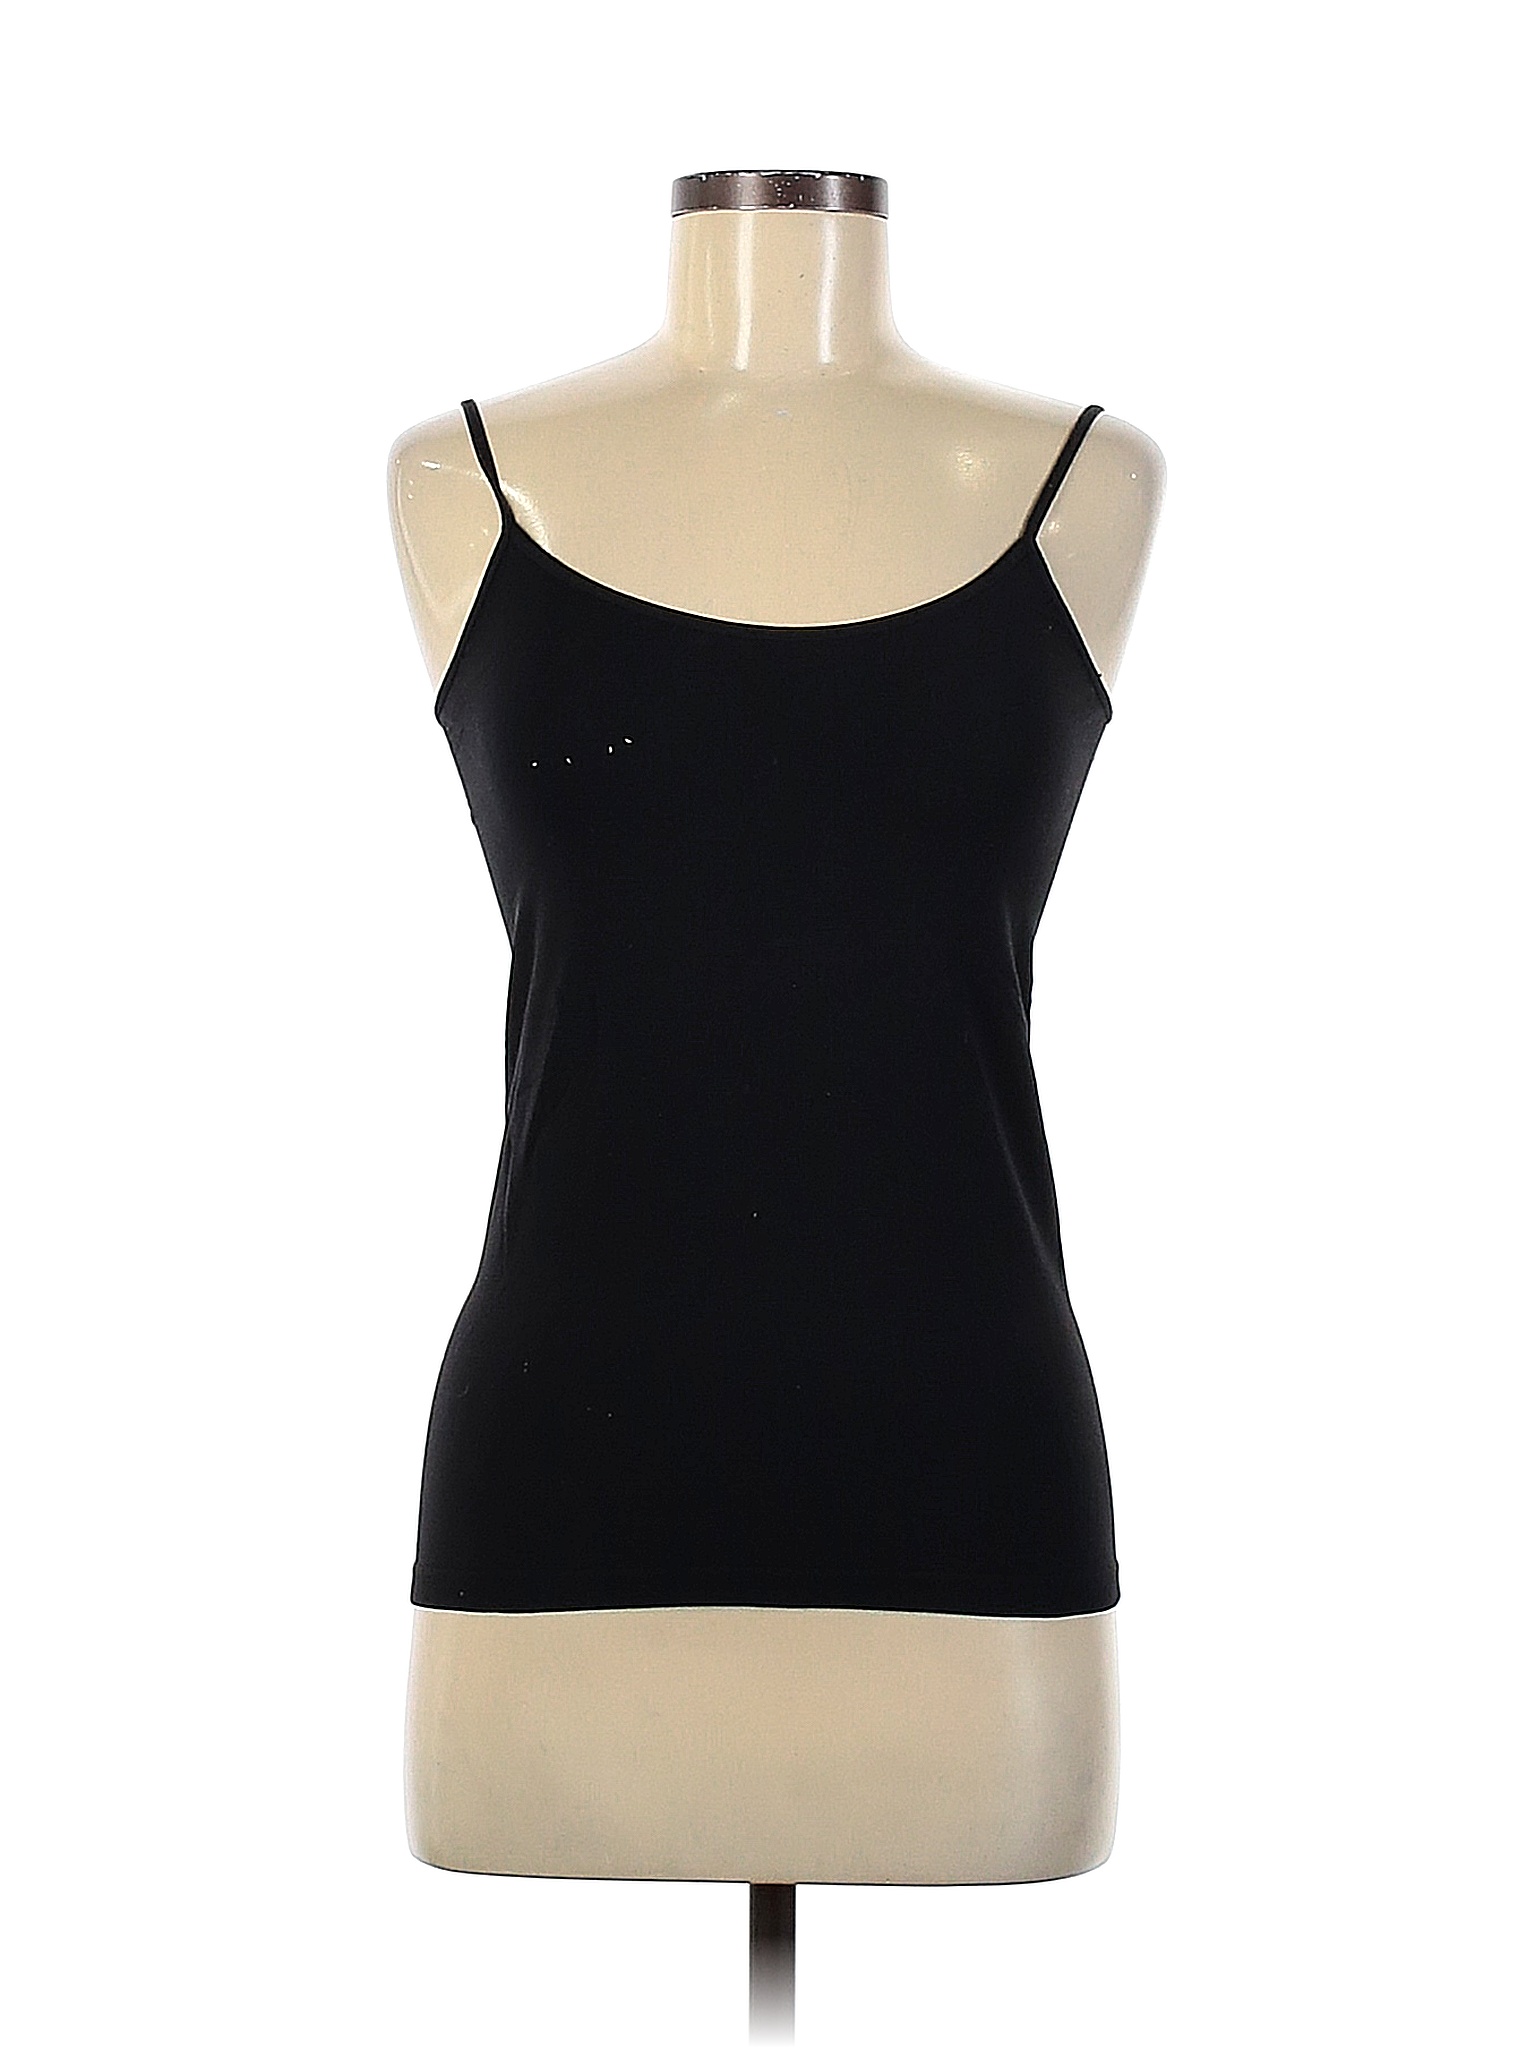 The Limited Women's Tank Top - Black - M